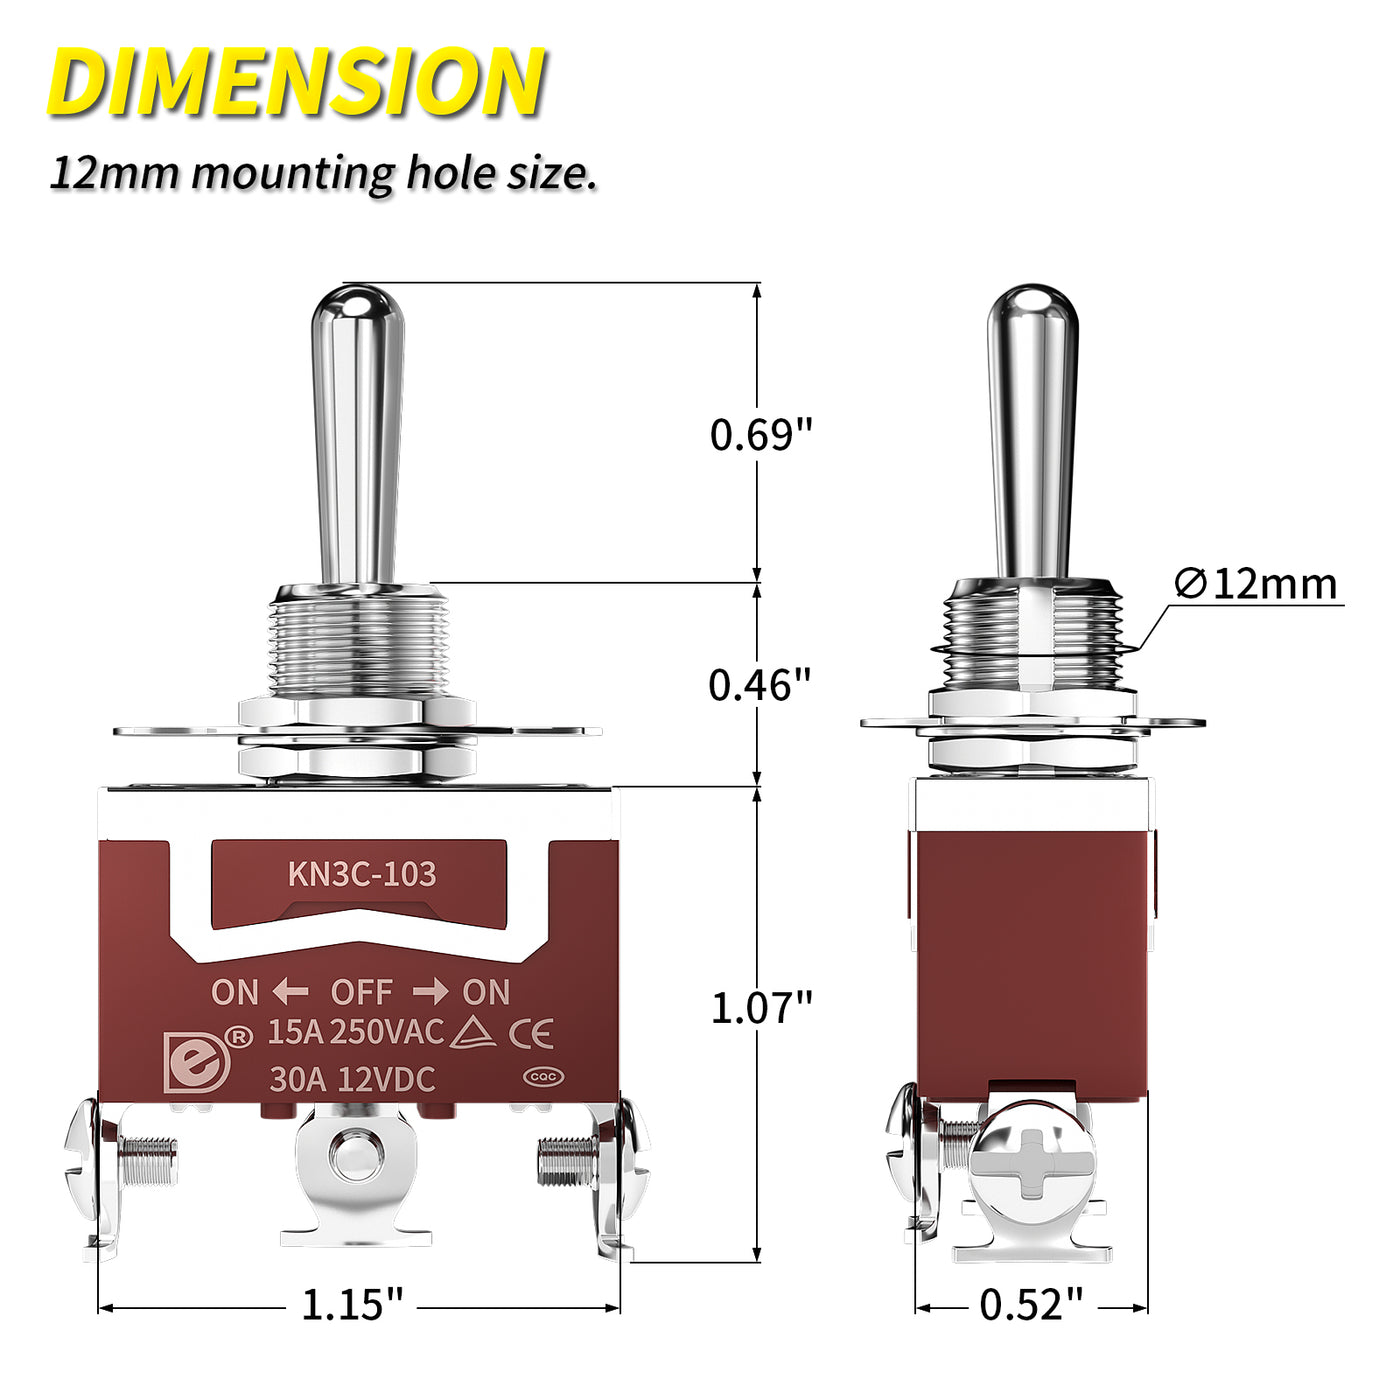 KN3C-103+WPC-06 30A 12VDC SPDT ON-OFF-ON 3 Pins Toggle Switch Dimension